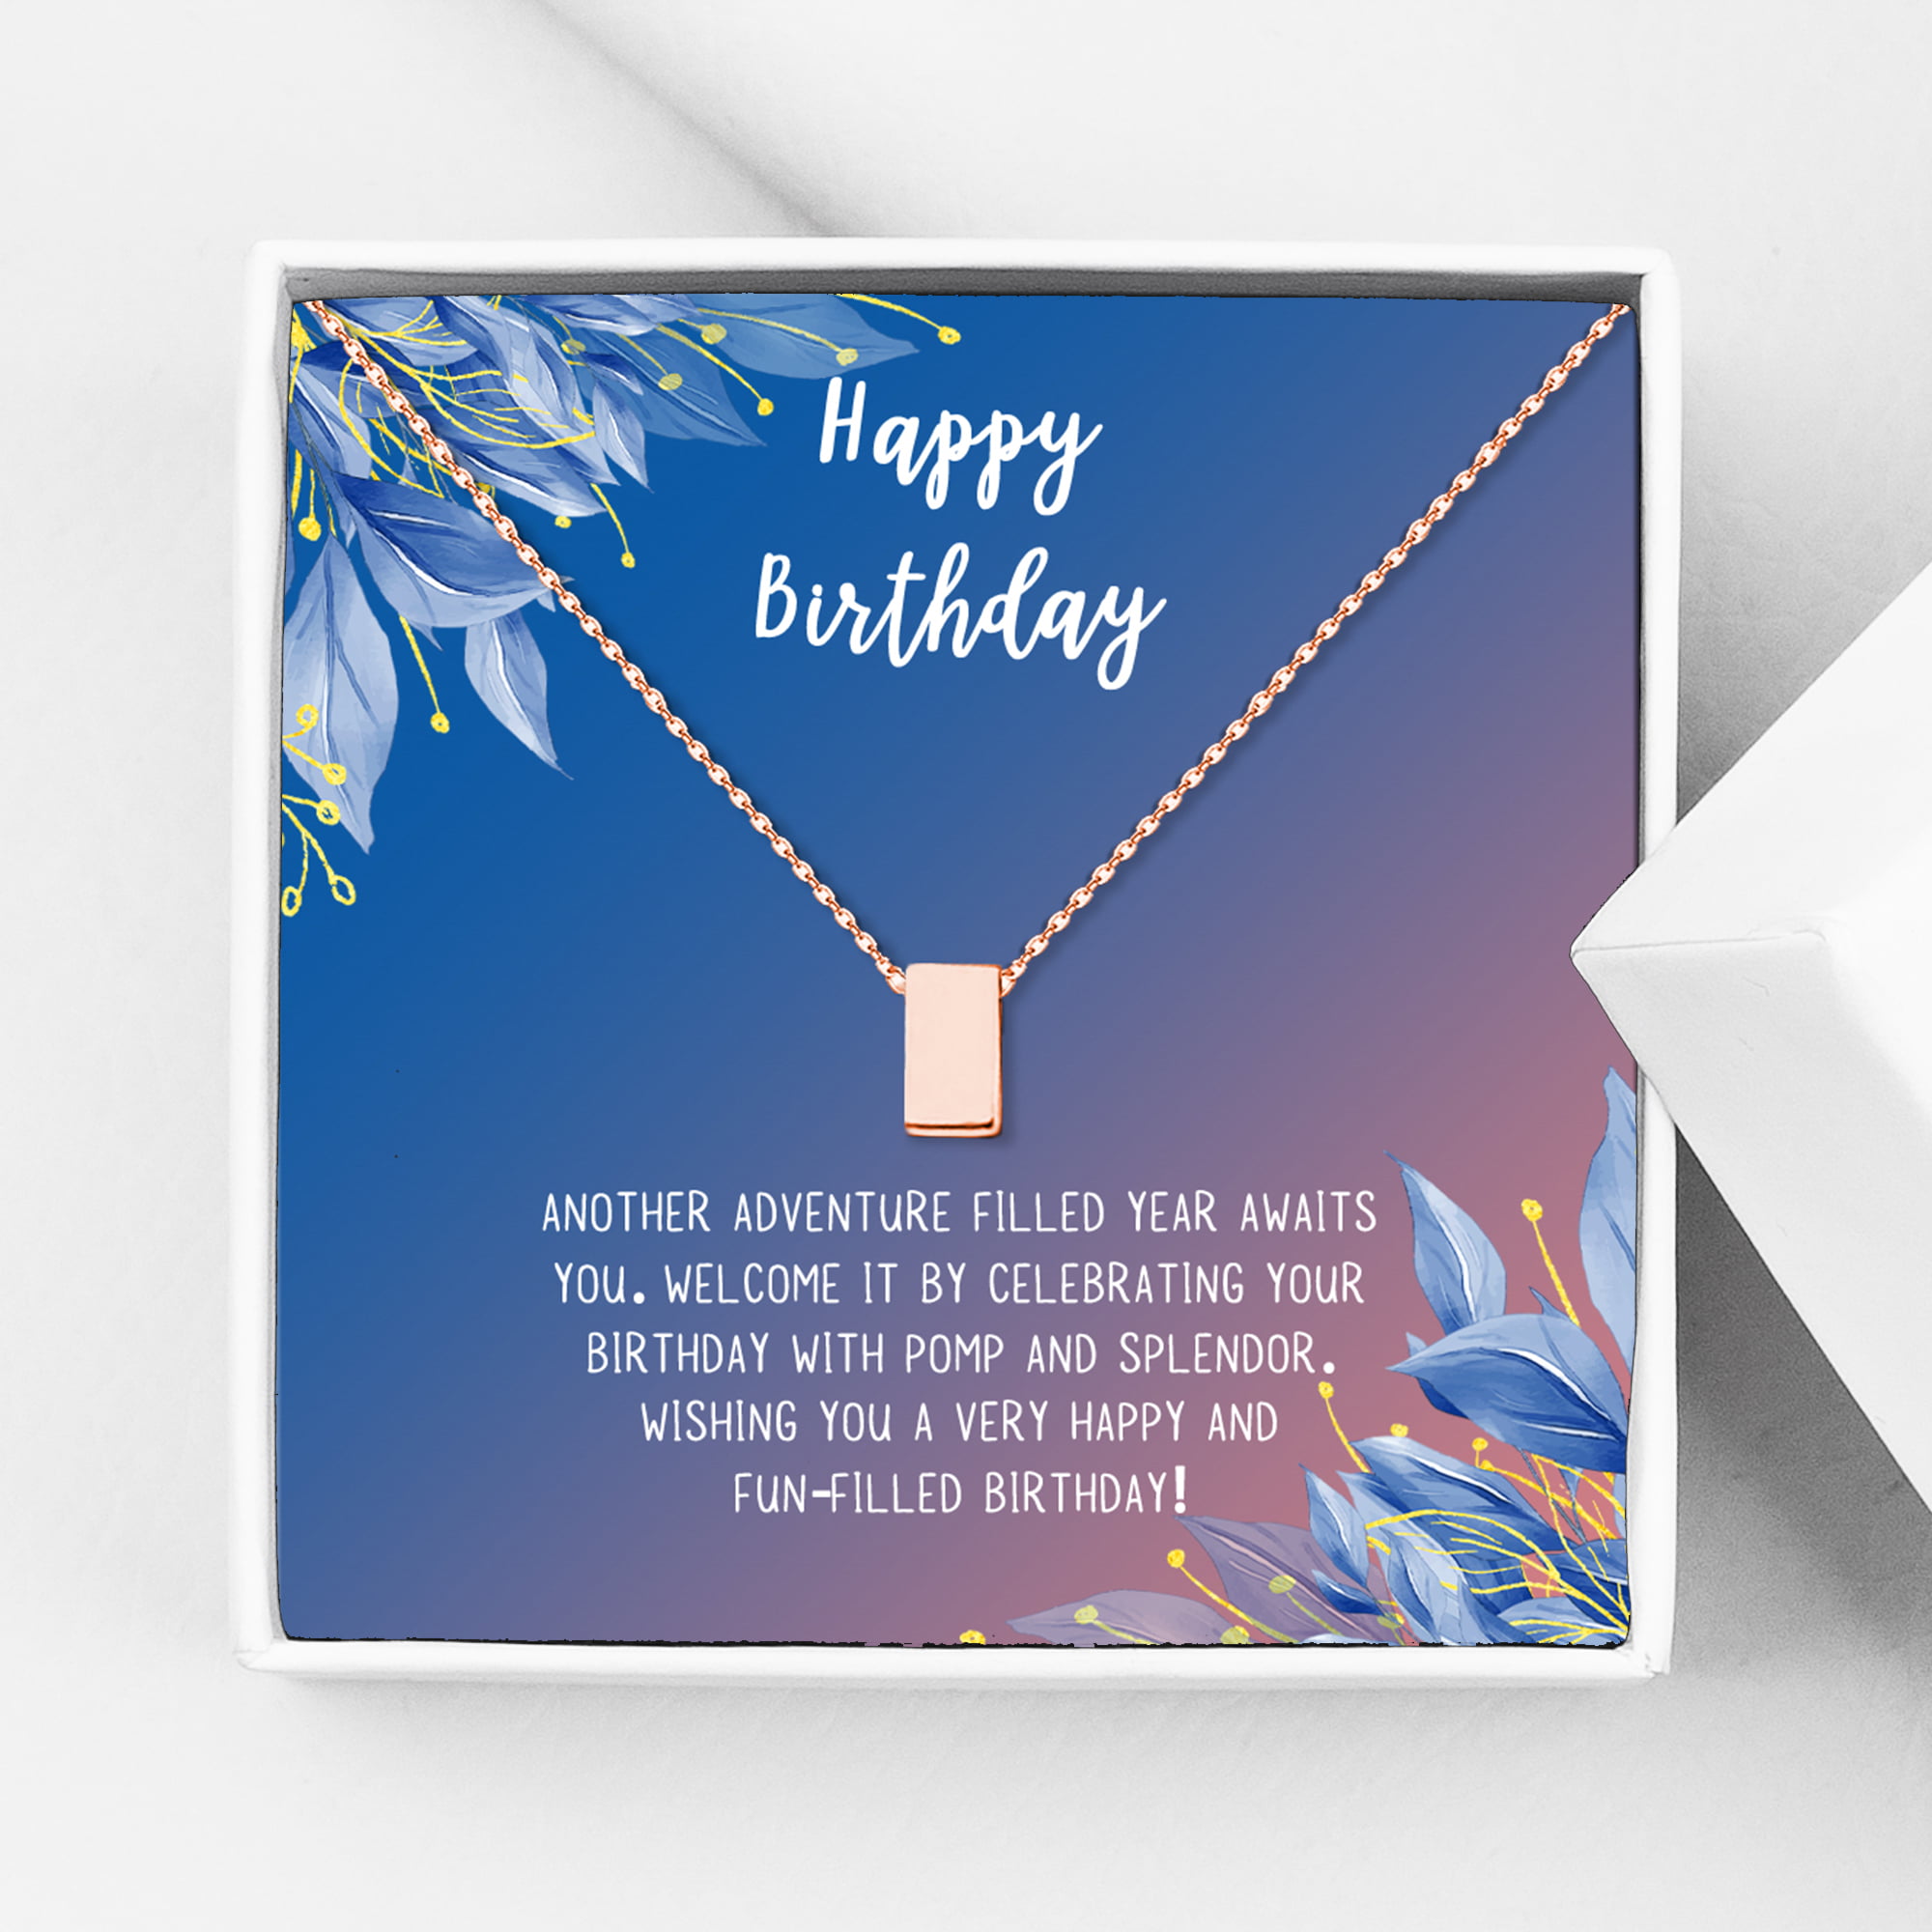 Details about   Personalised Anniversary Card Funny Gifts For Her Him Girlfriend Boyfriend 